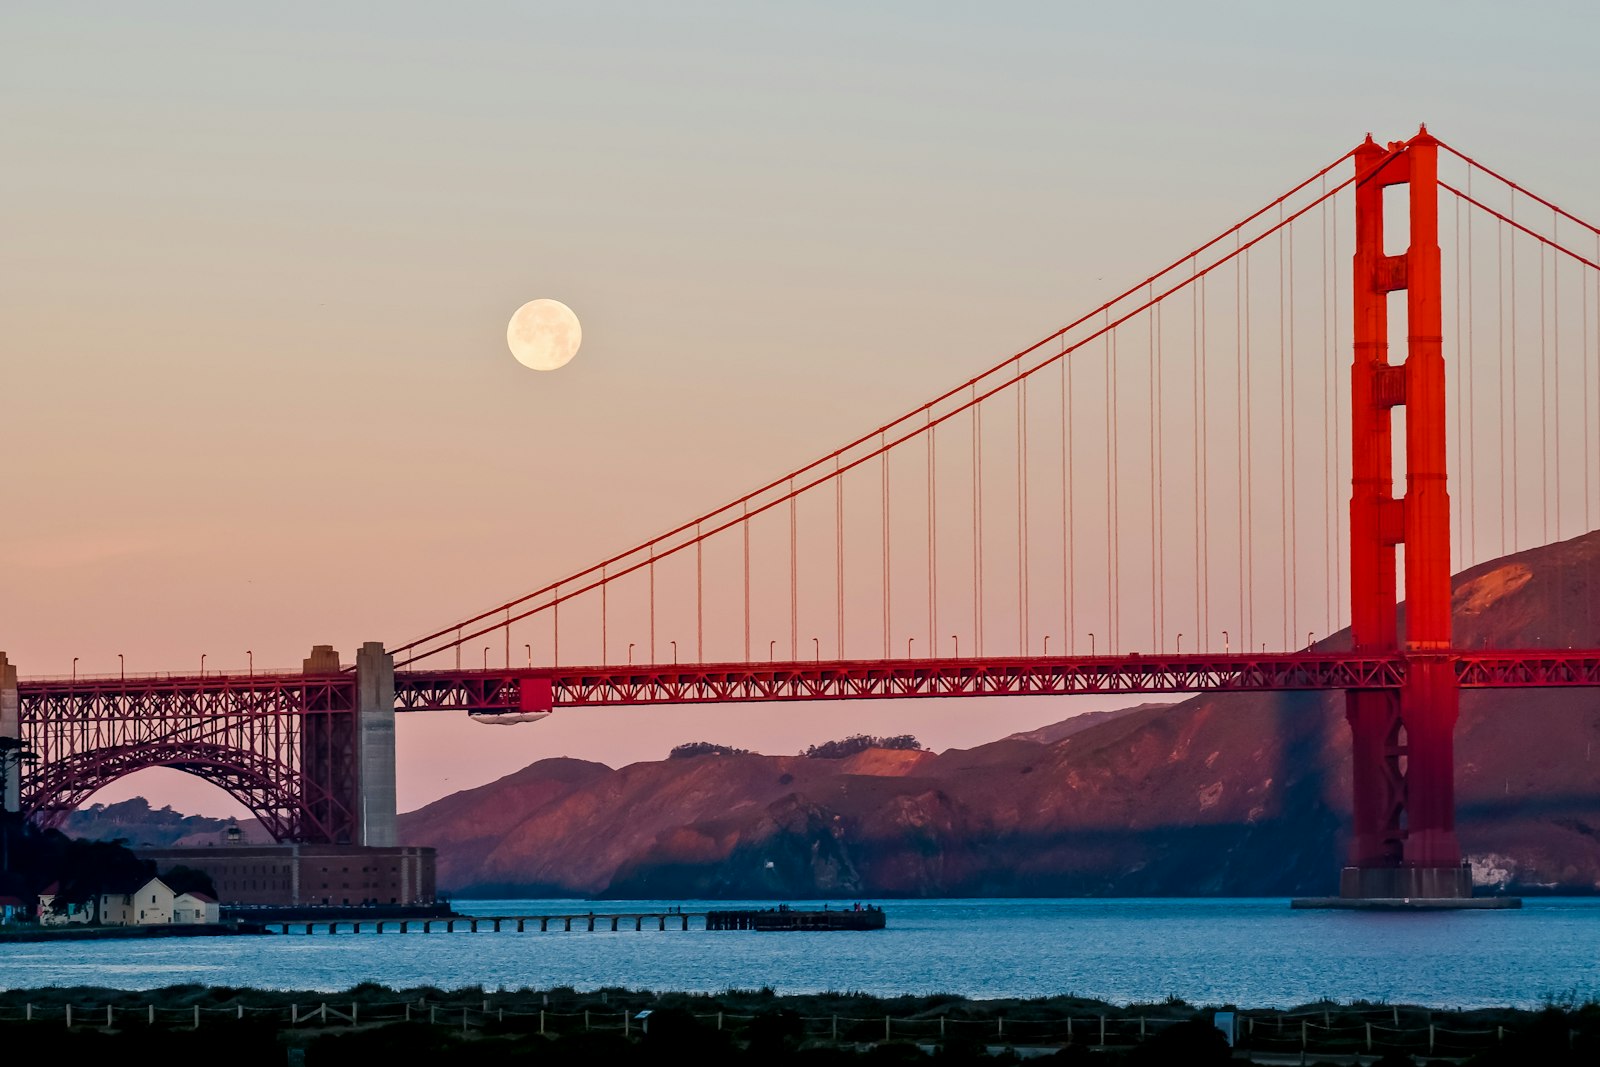 Golden Gate Bridge and the moon during the golden hour